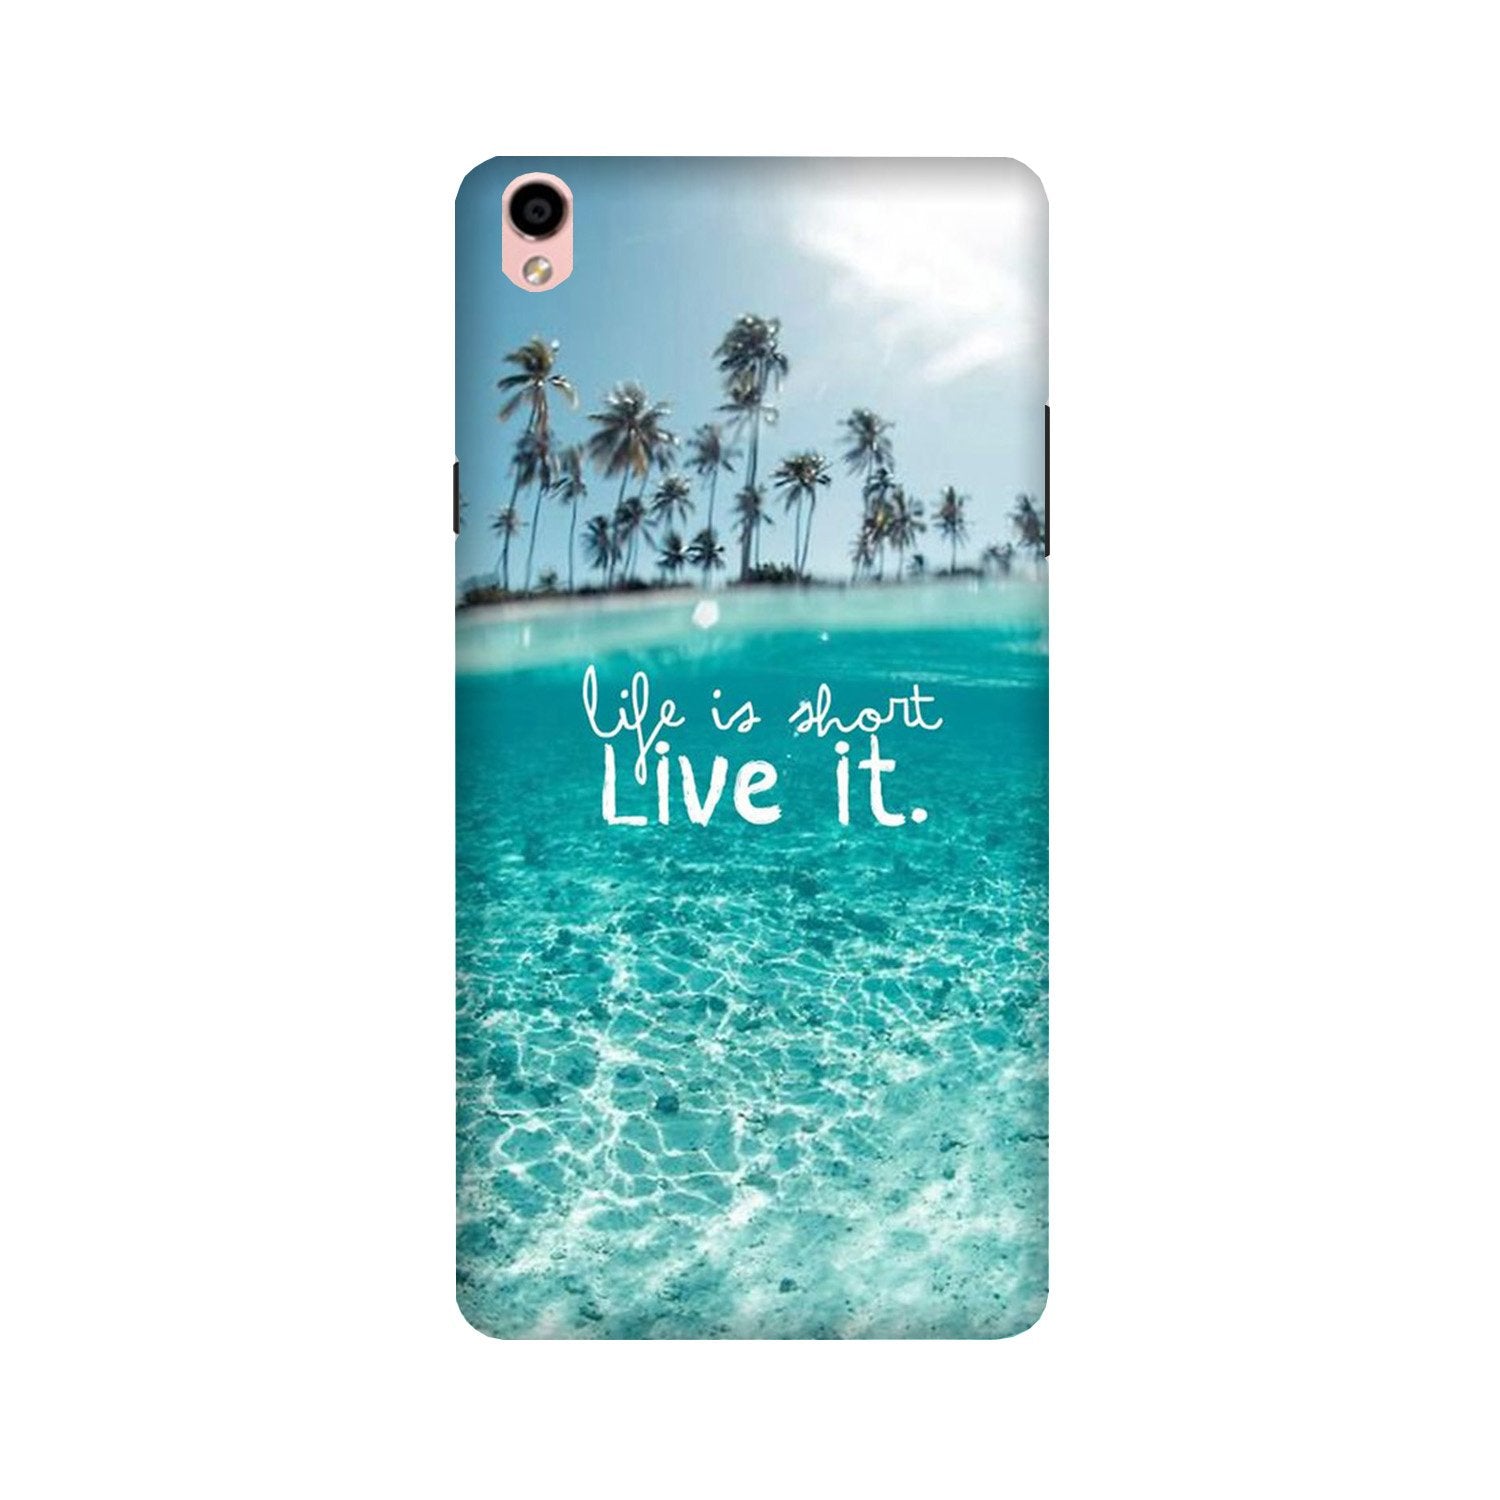 Life is short live it Case for Oppo F1 Plus